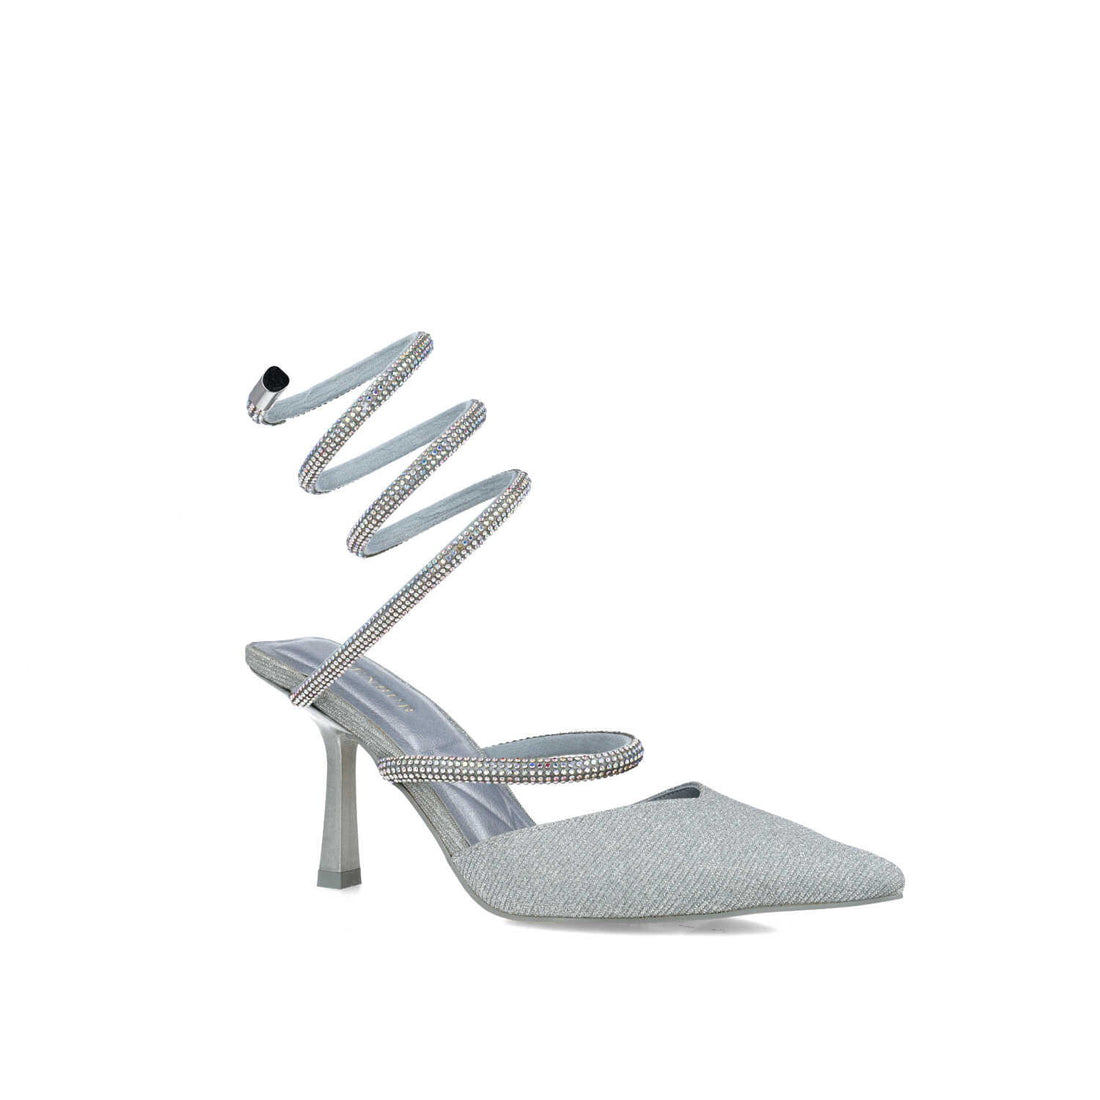 Silver Pumps With Wrap Around Strap_24716_09_02